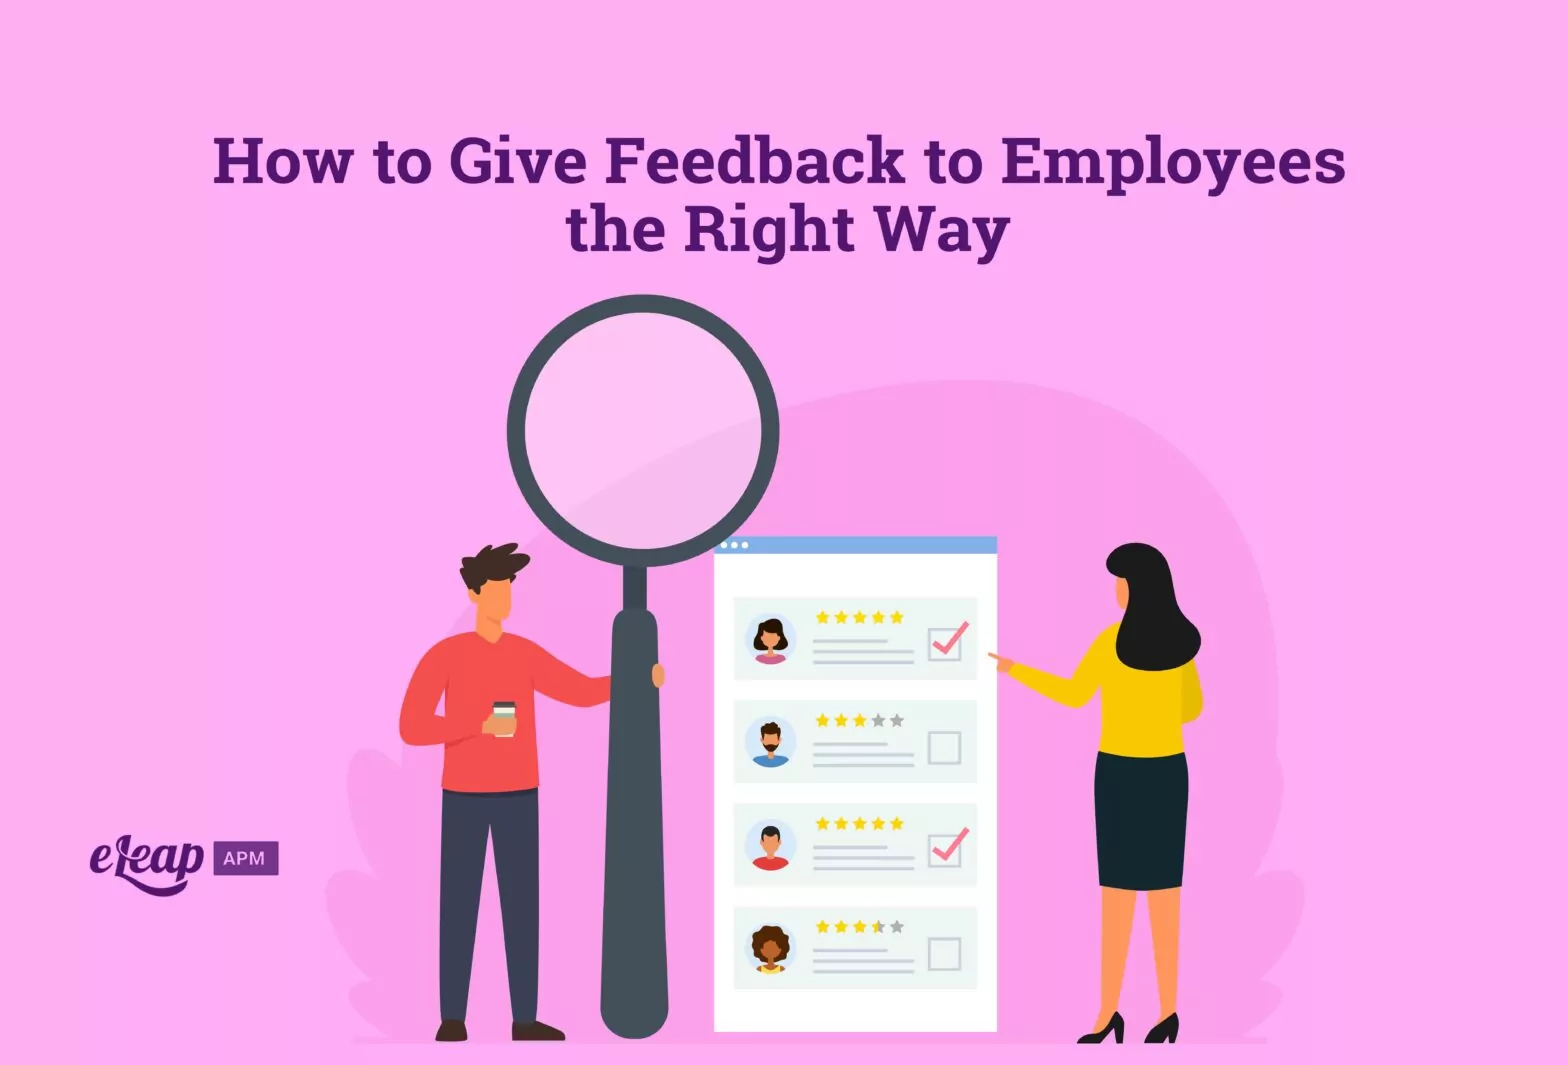 How to Give Feedback to Employees the Right Way